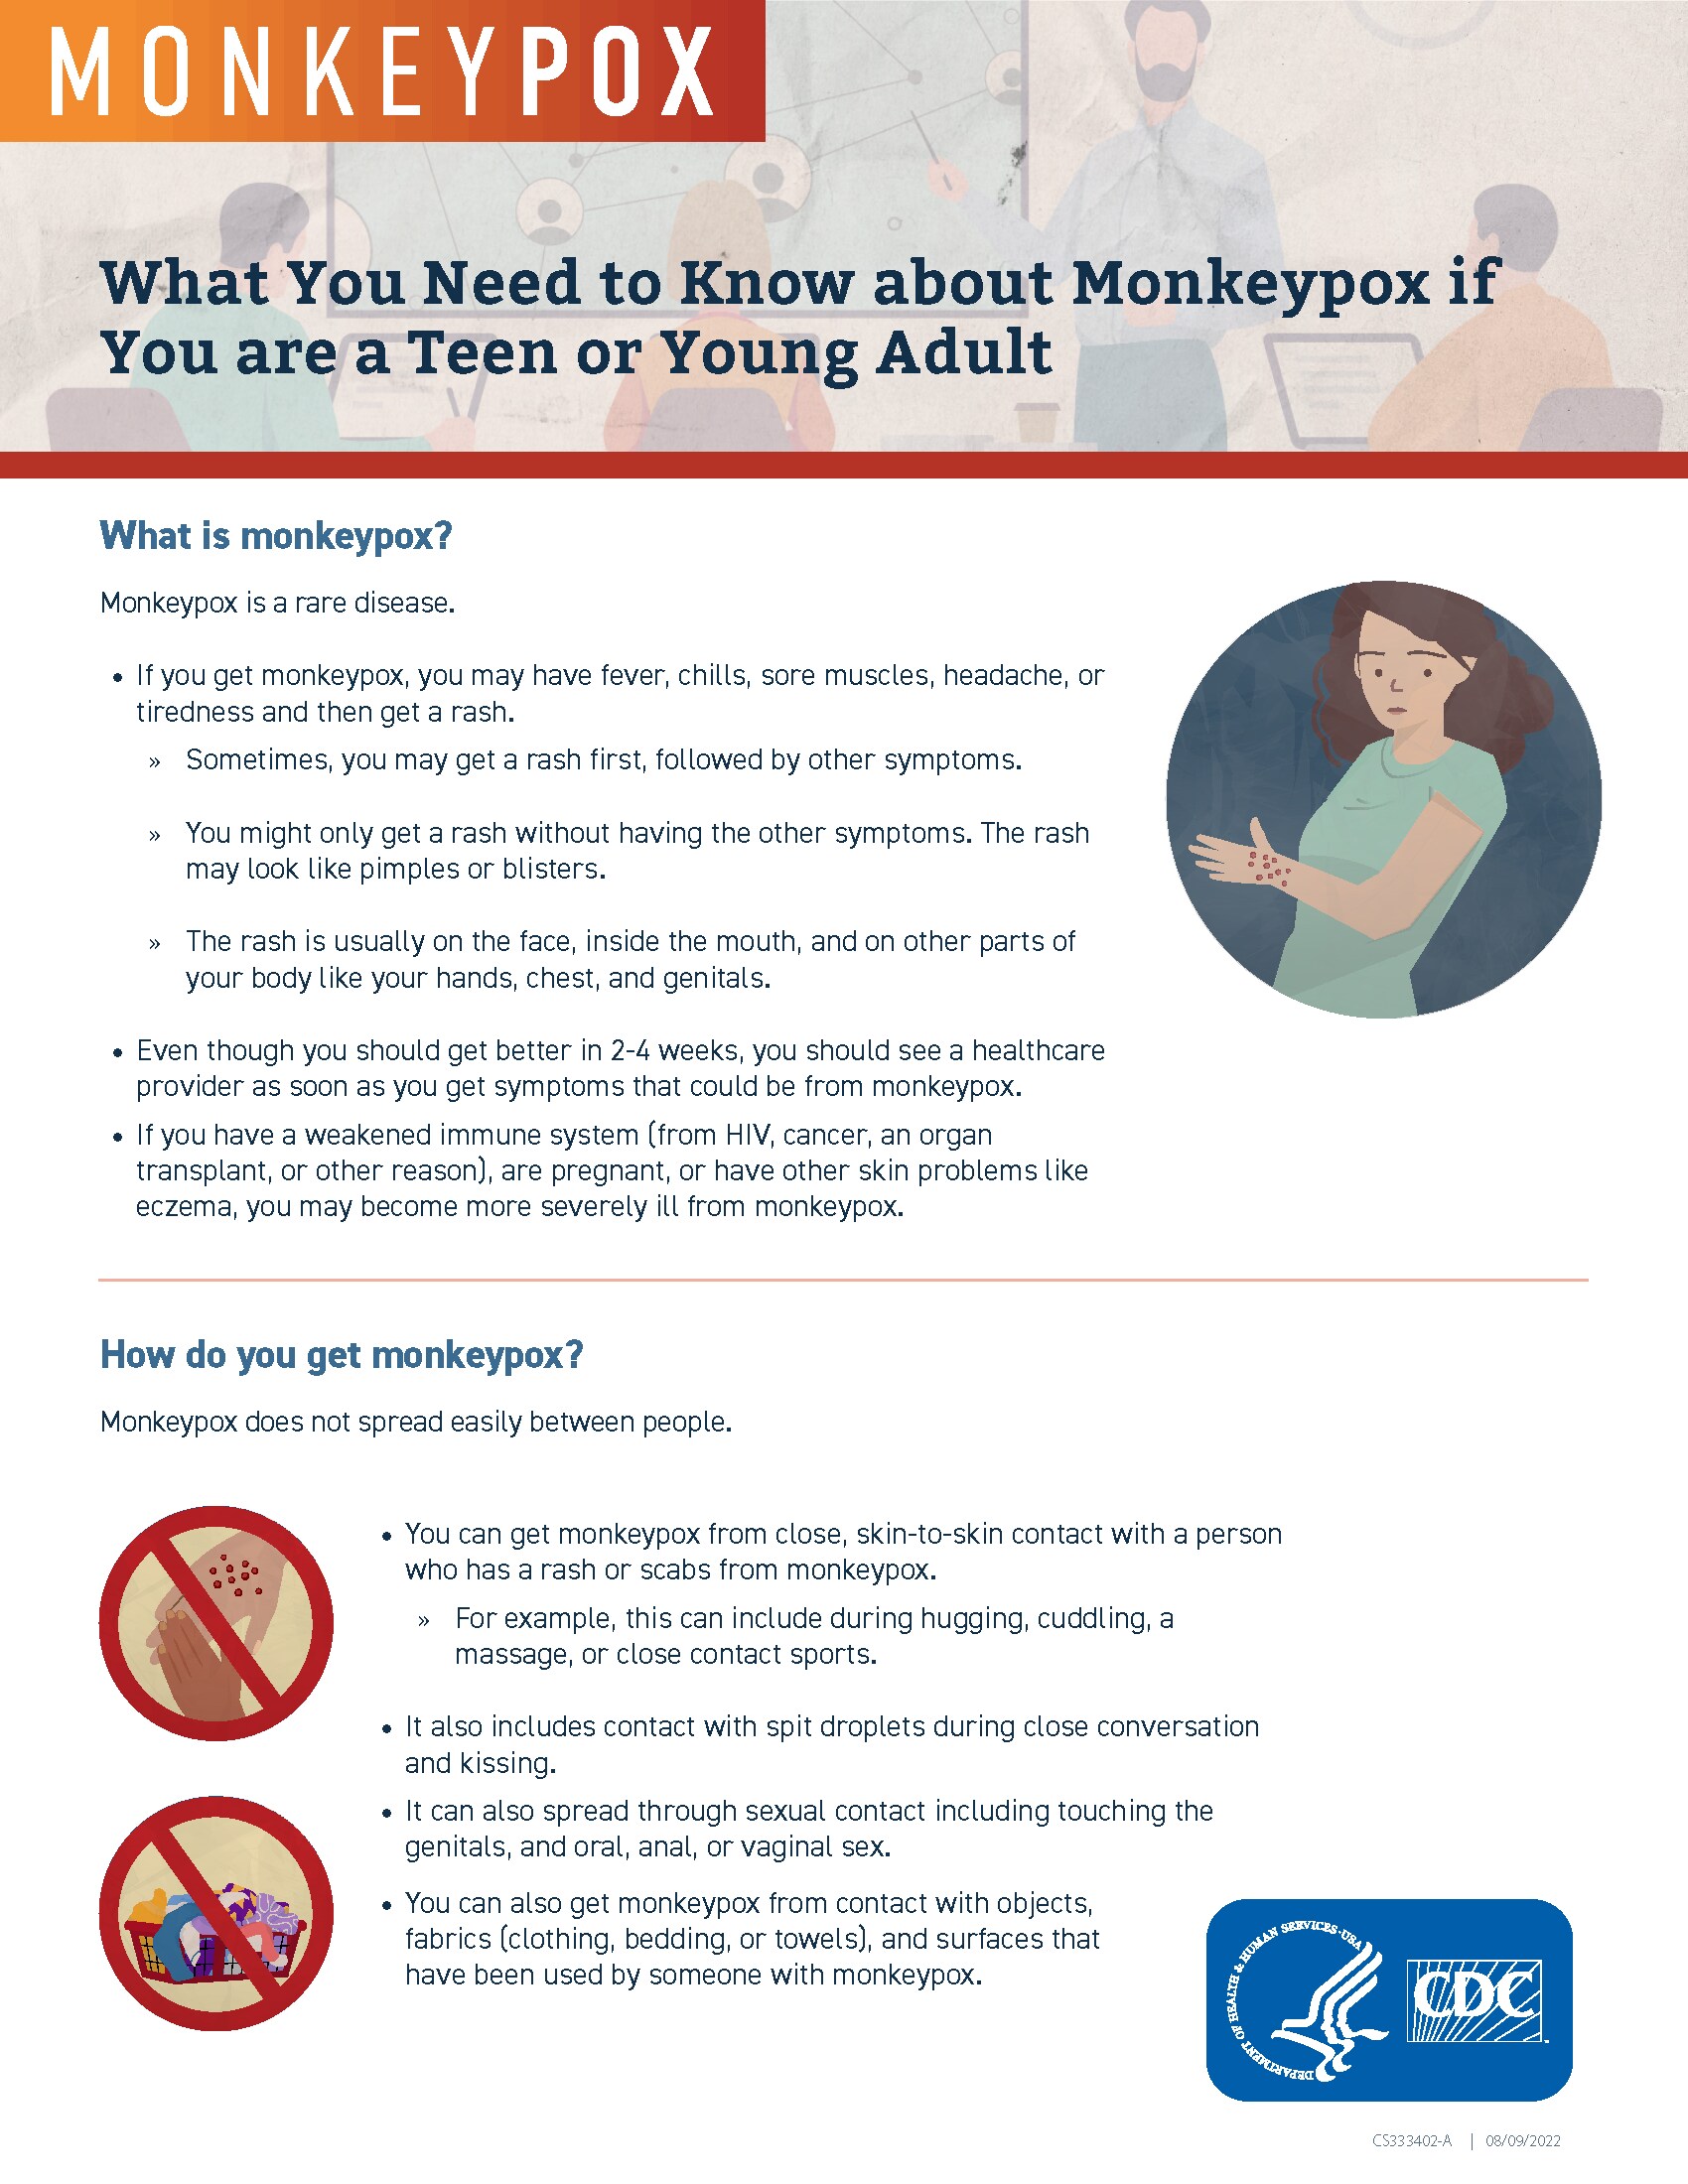 Monkeypox. What you need to know about monkeypox if you are a teen or young adult.